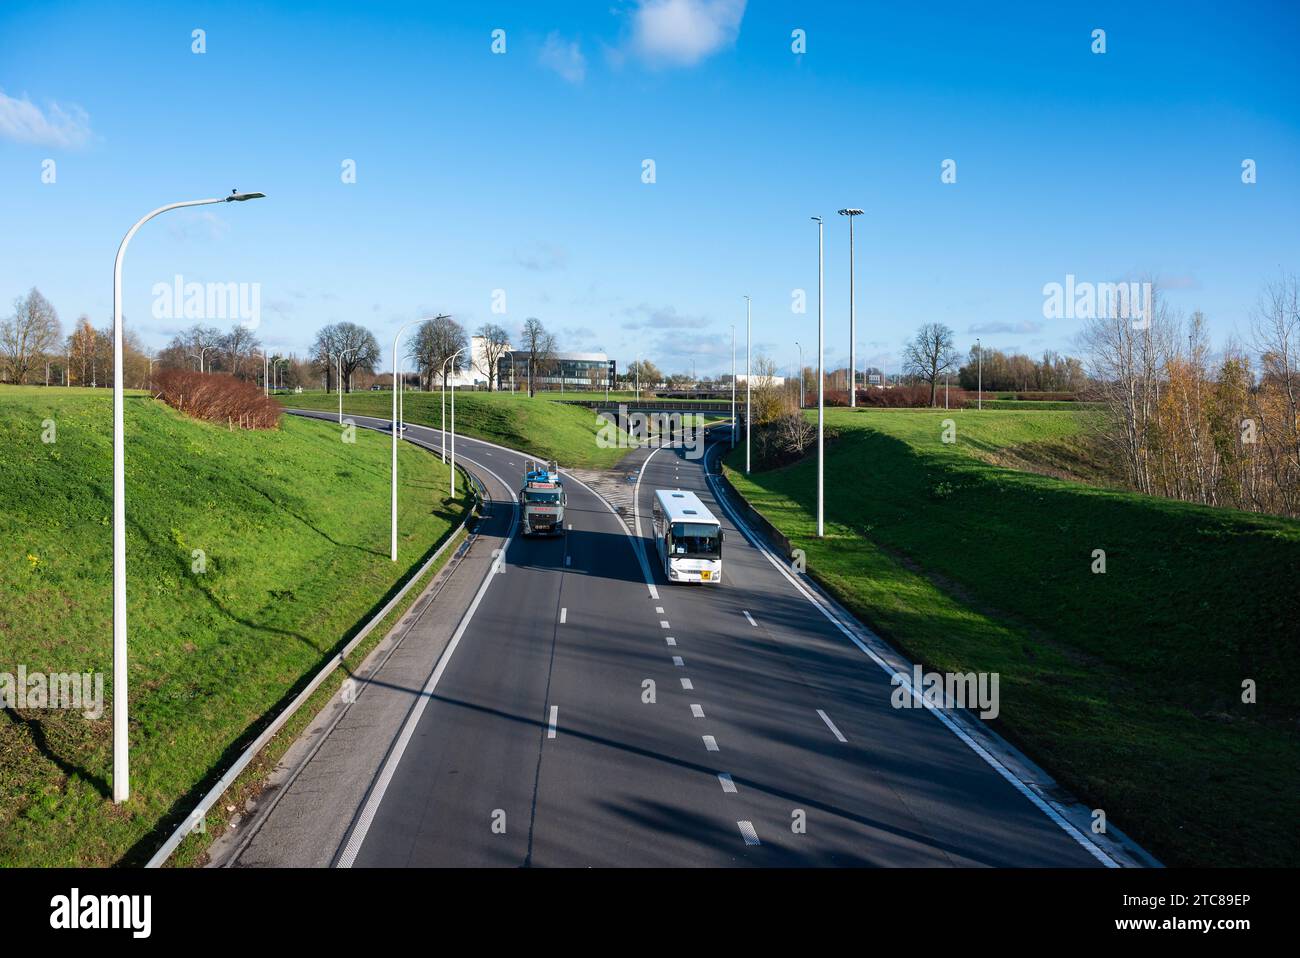 Strombeek-Bever, Flemish Brabant Region, Belgium, November 28, 2023 - Trucs, busses and cars driving the ring road Credit: Imago/Alamy Live News Stock Photo